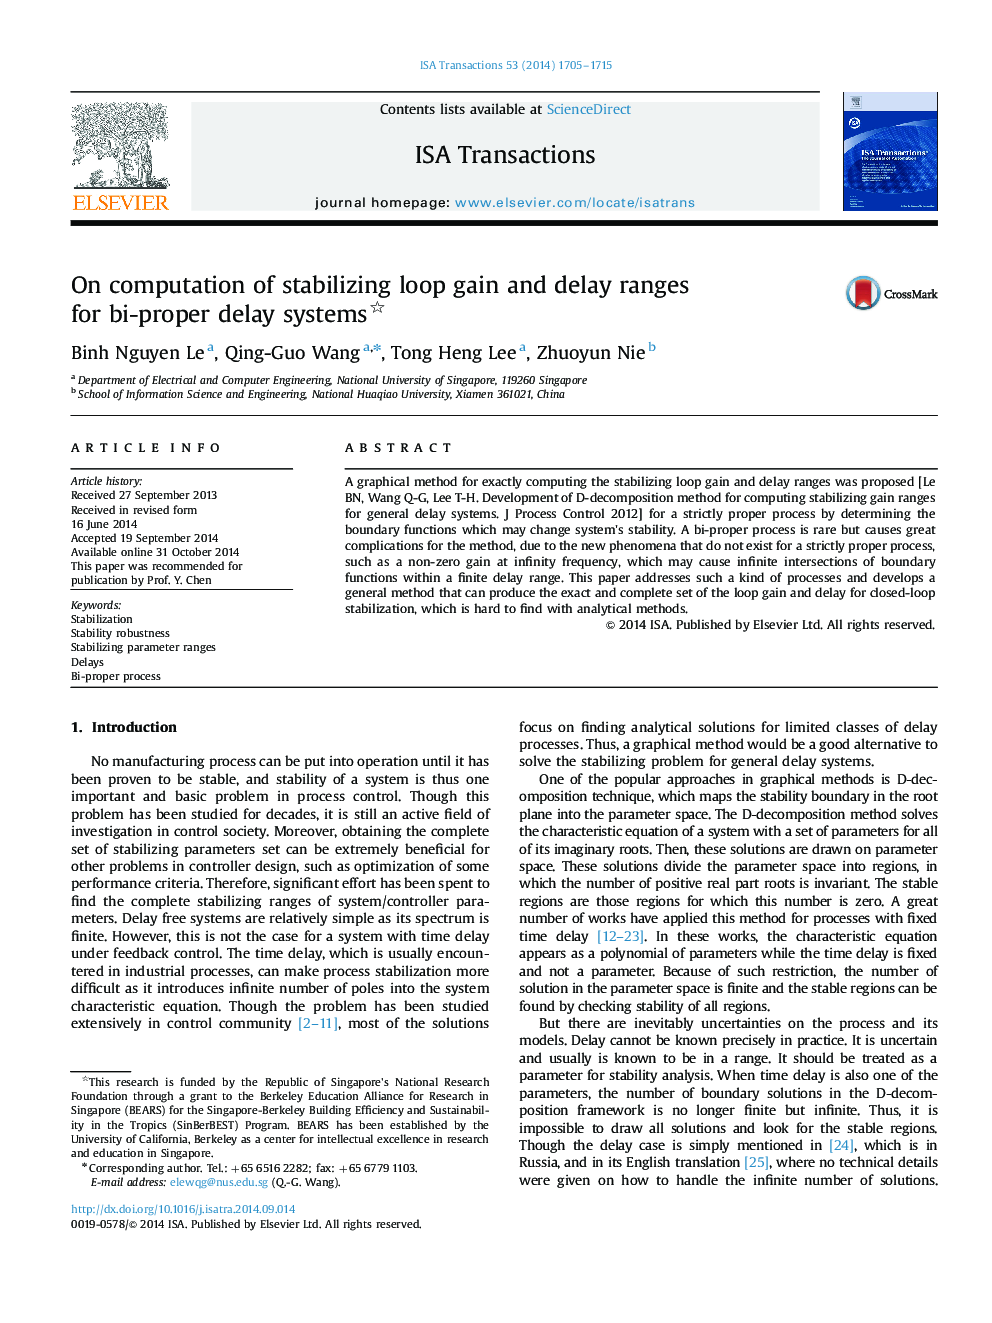 Research ArticleOn computation of stabilizing loop gain and delay ranges for bi-proper delay systems